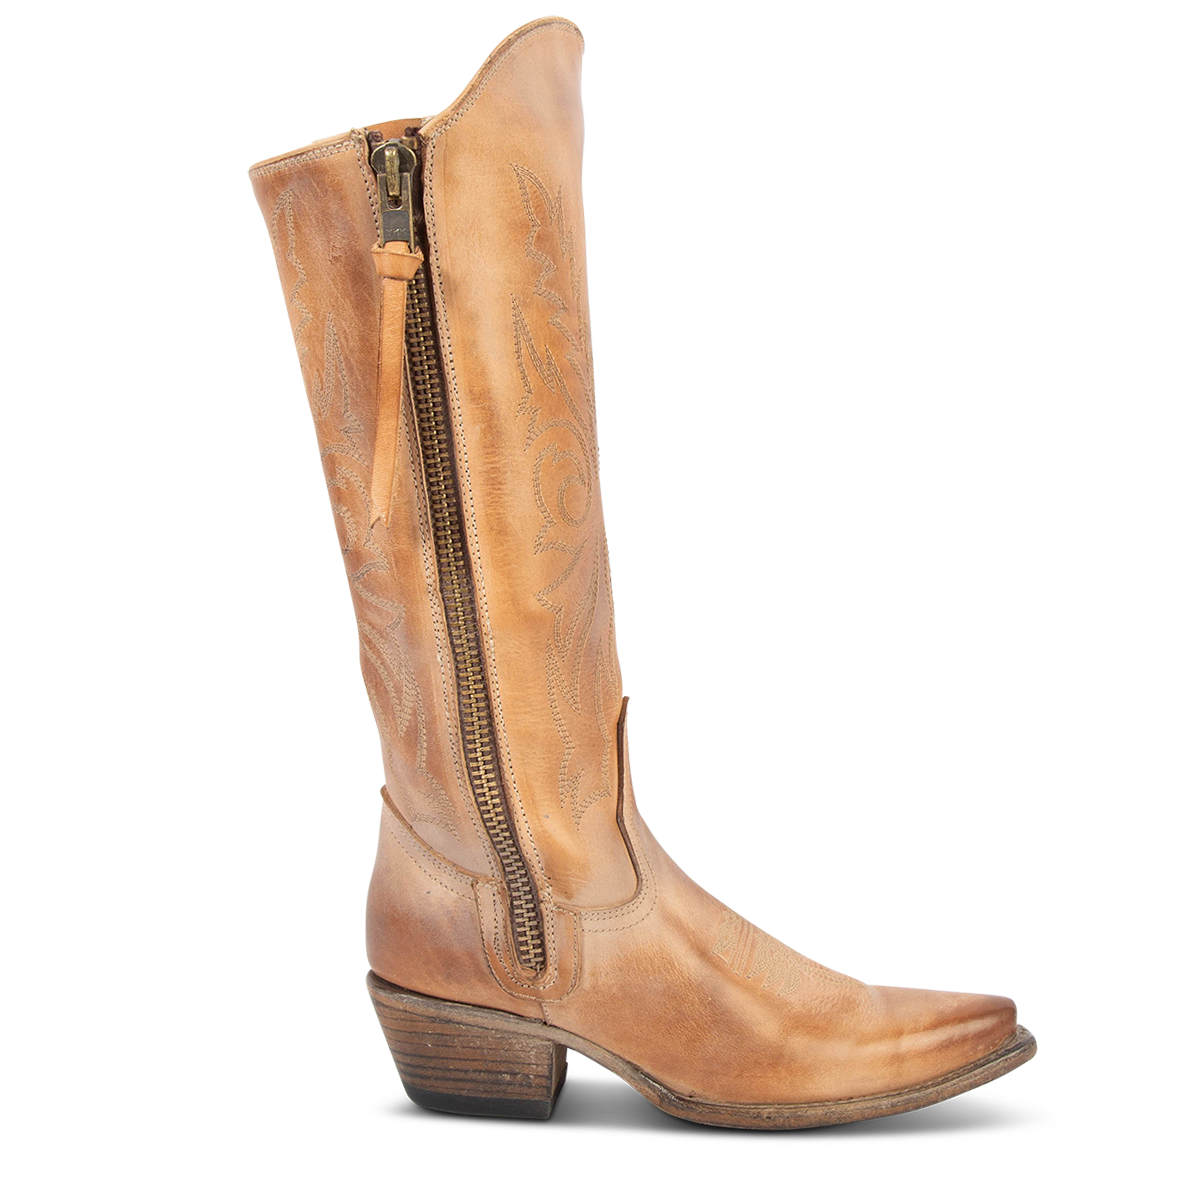 FREEBIRD women's Wolfgang taupe tall western boot snip toe and outer zip closures